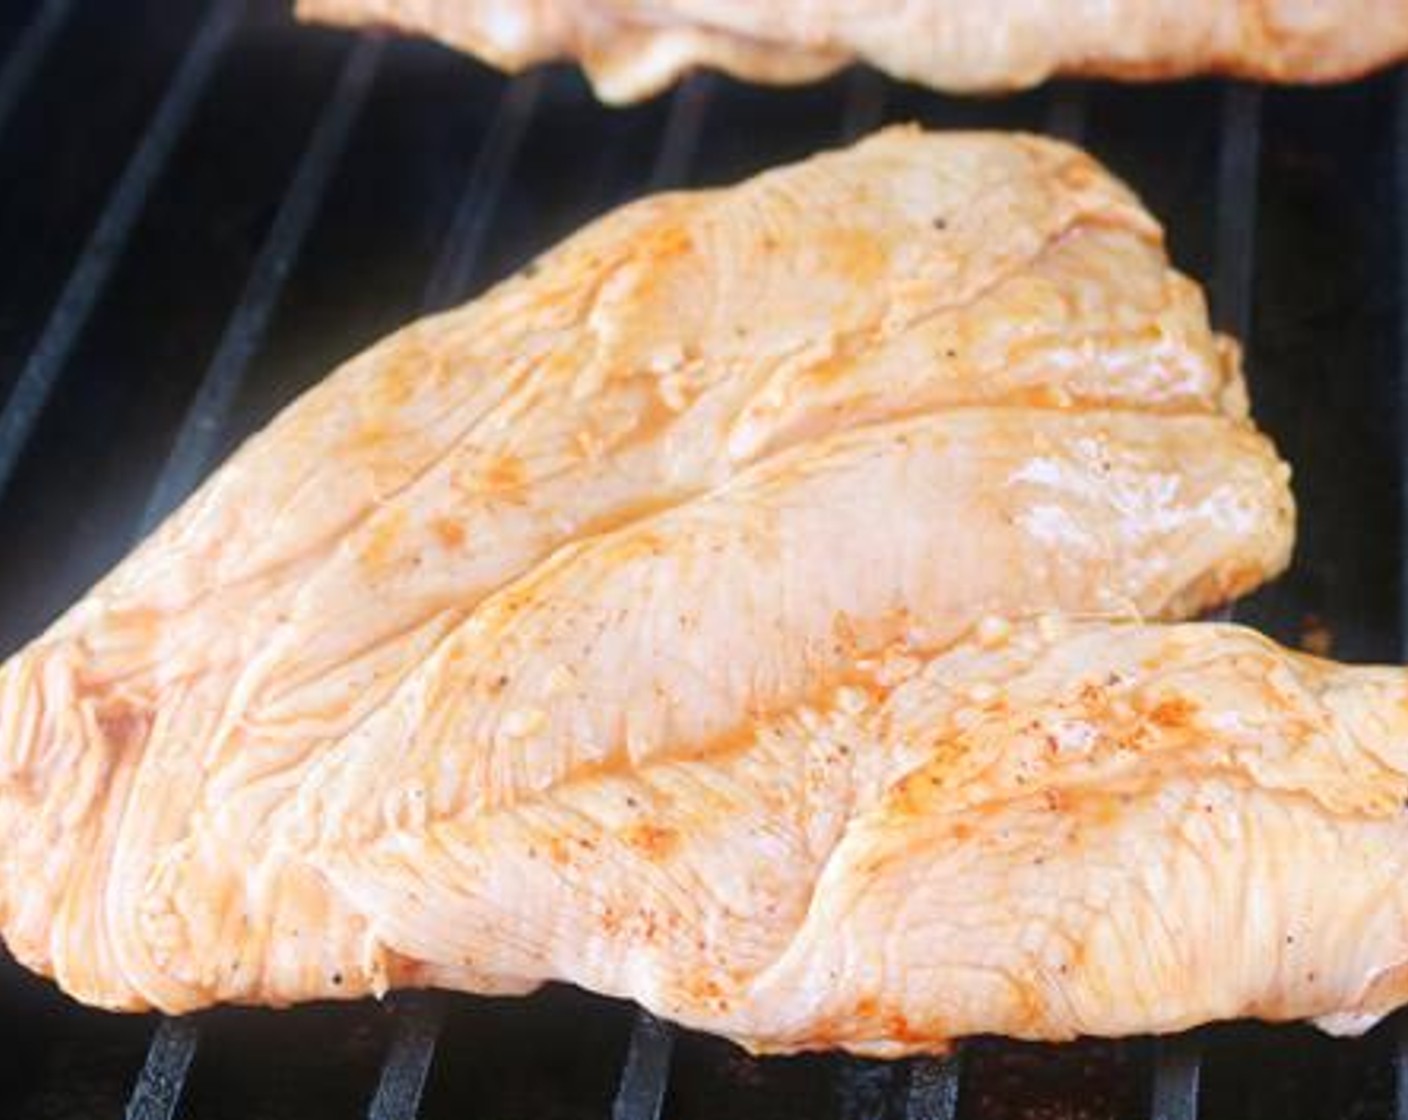 step 5 Remove chicken breasts from marinade and season with BBQ rub. Place directly on grill grates and cook for 8 minutes.